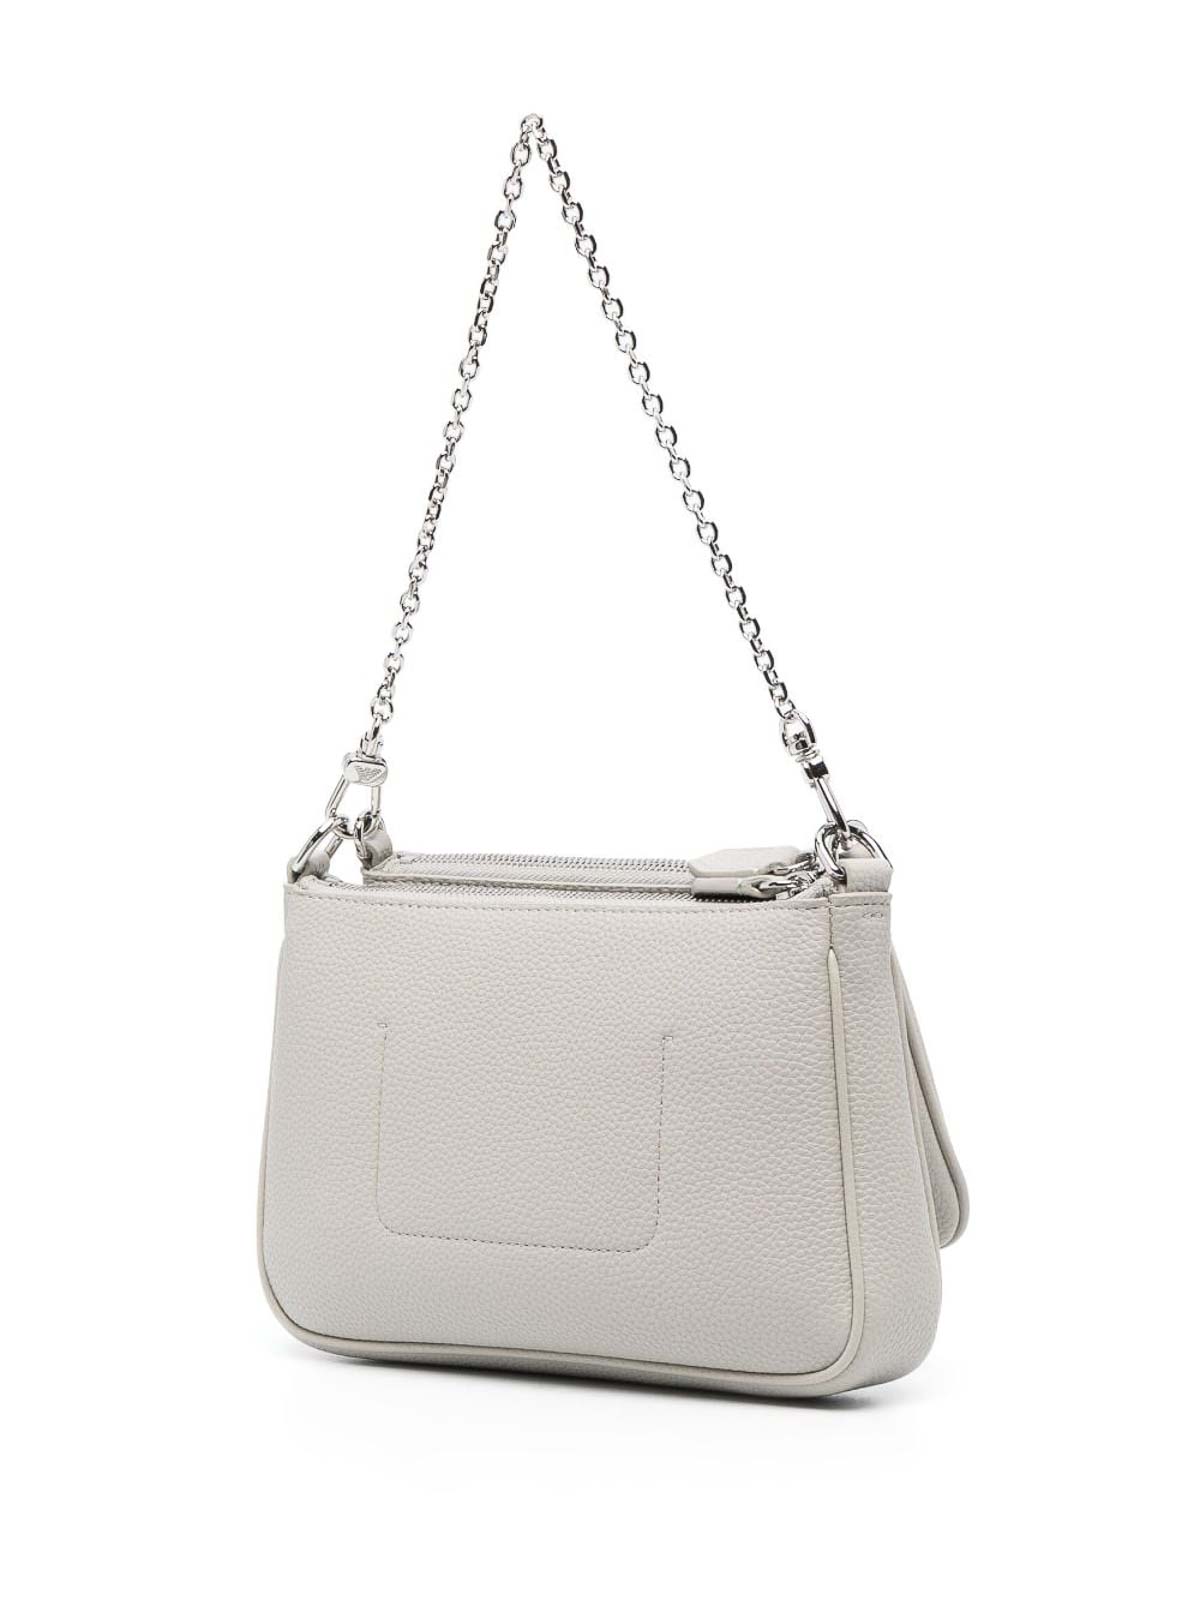 Deer-print leather shoulder bag with chain strap | EMPORIO ARMANI Woman